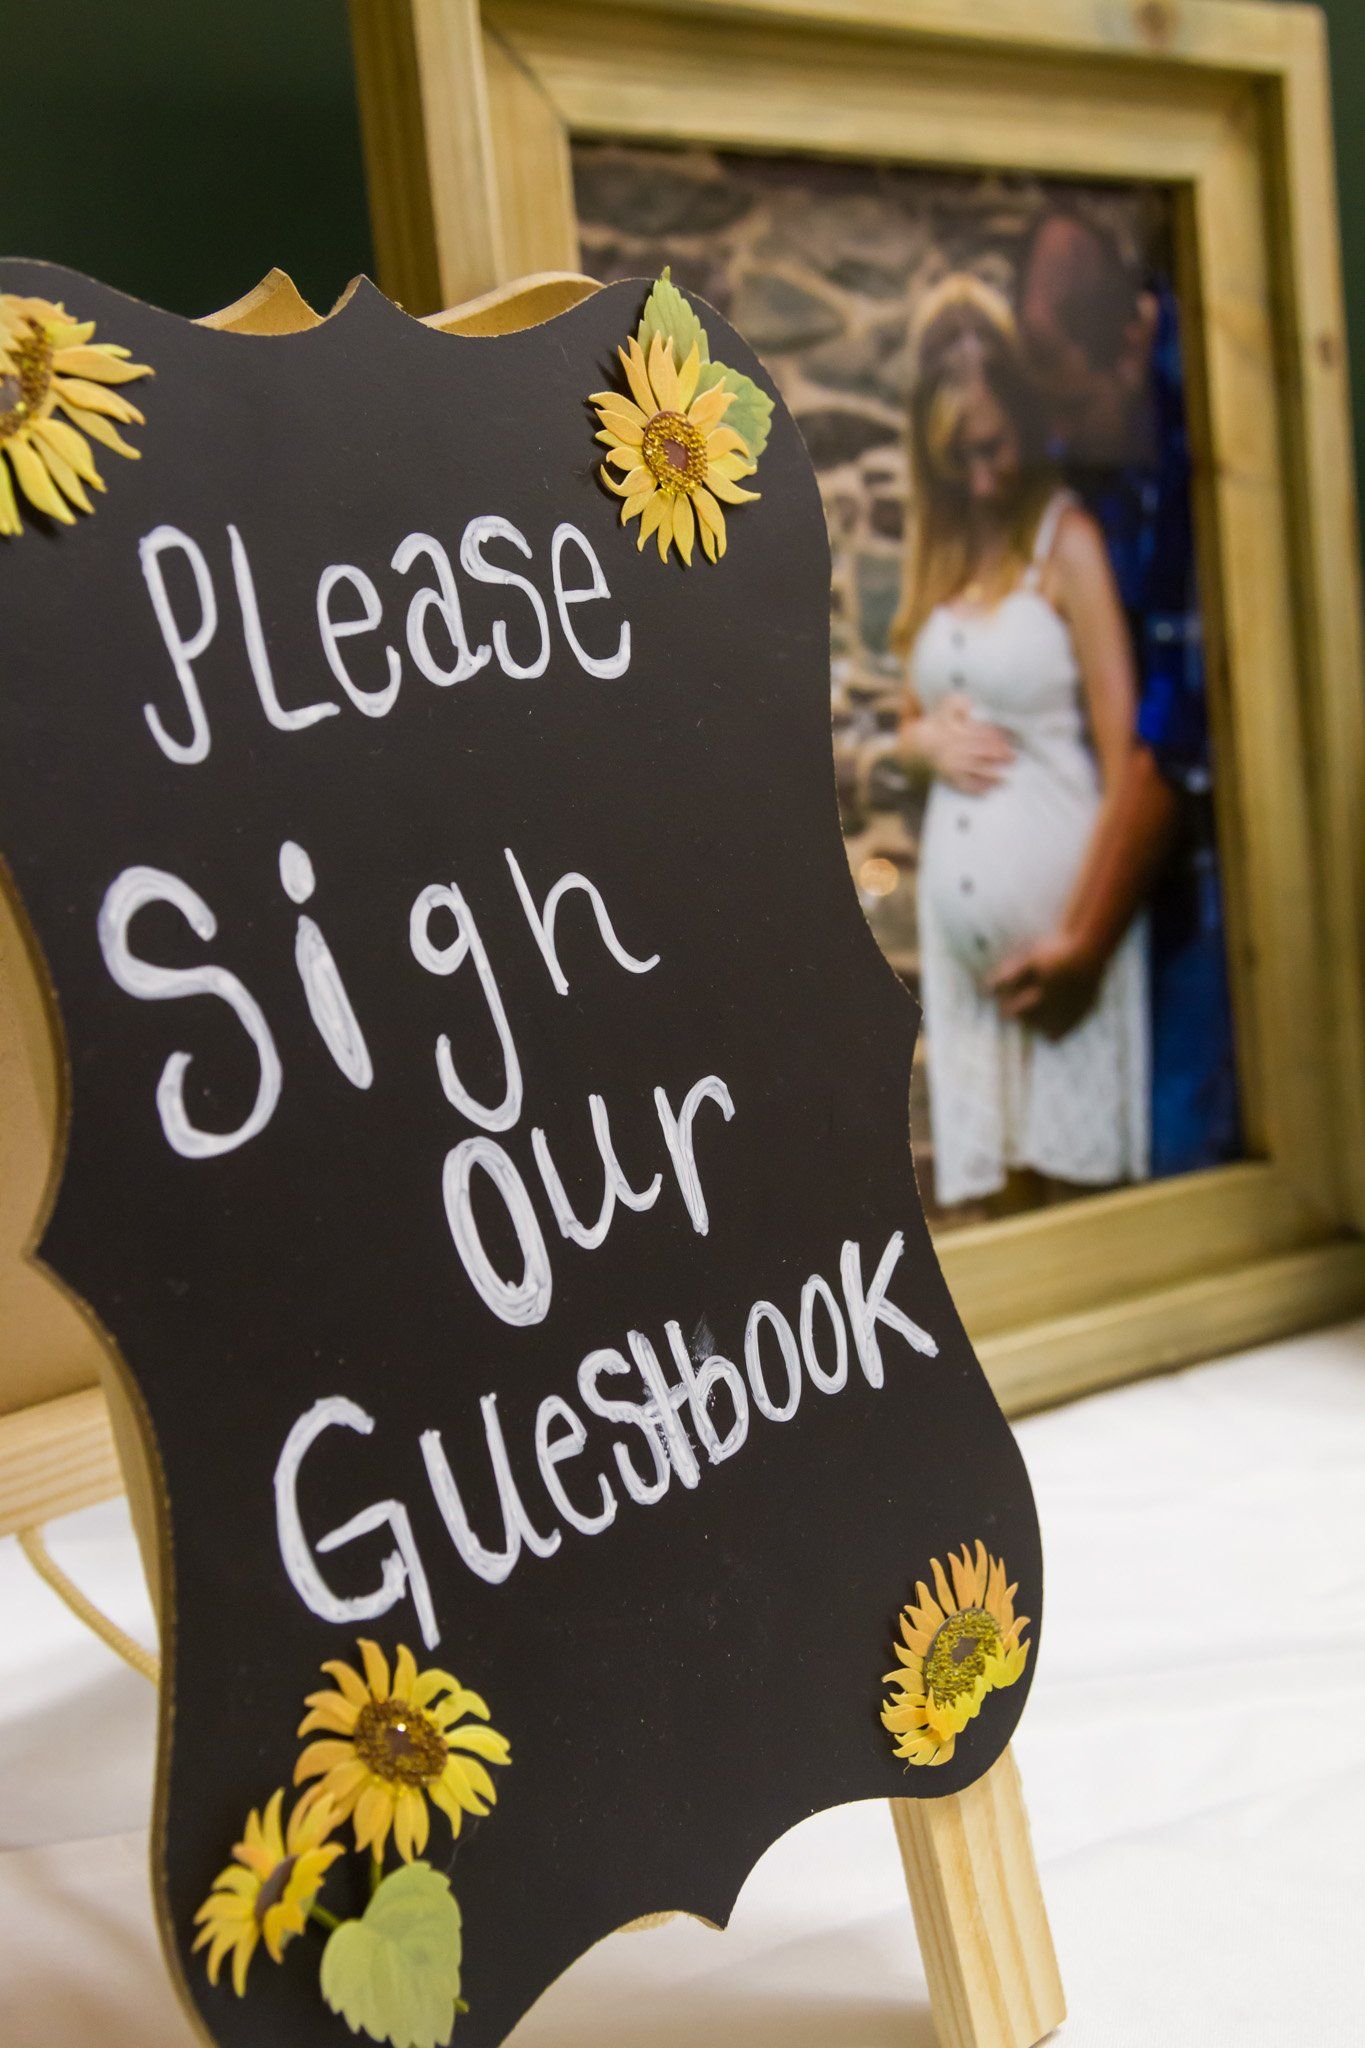 A photo of the guestbook sign with photographs in the background